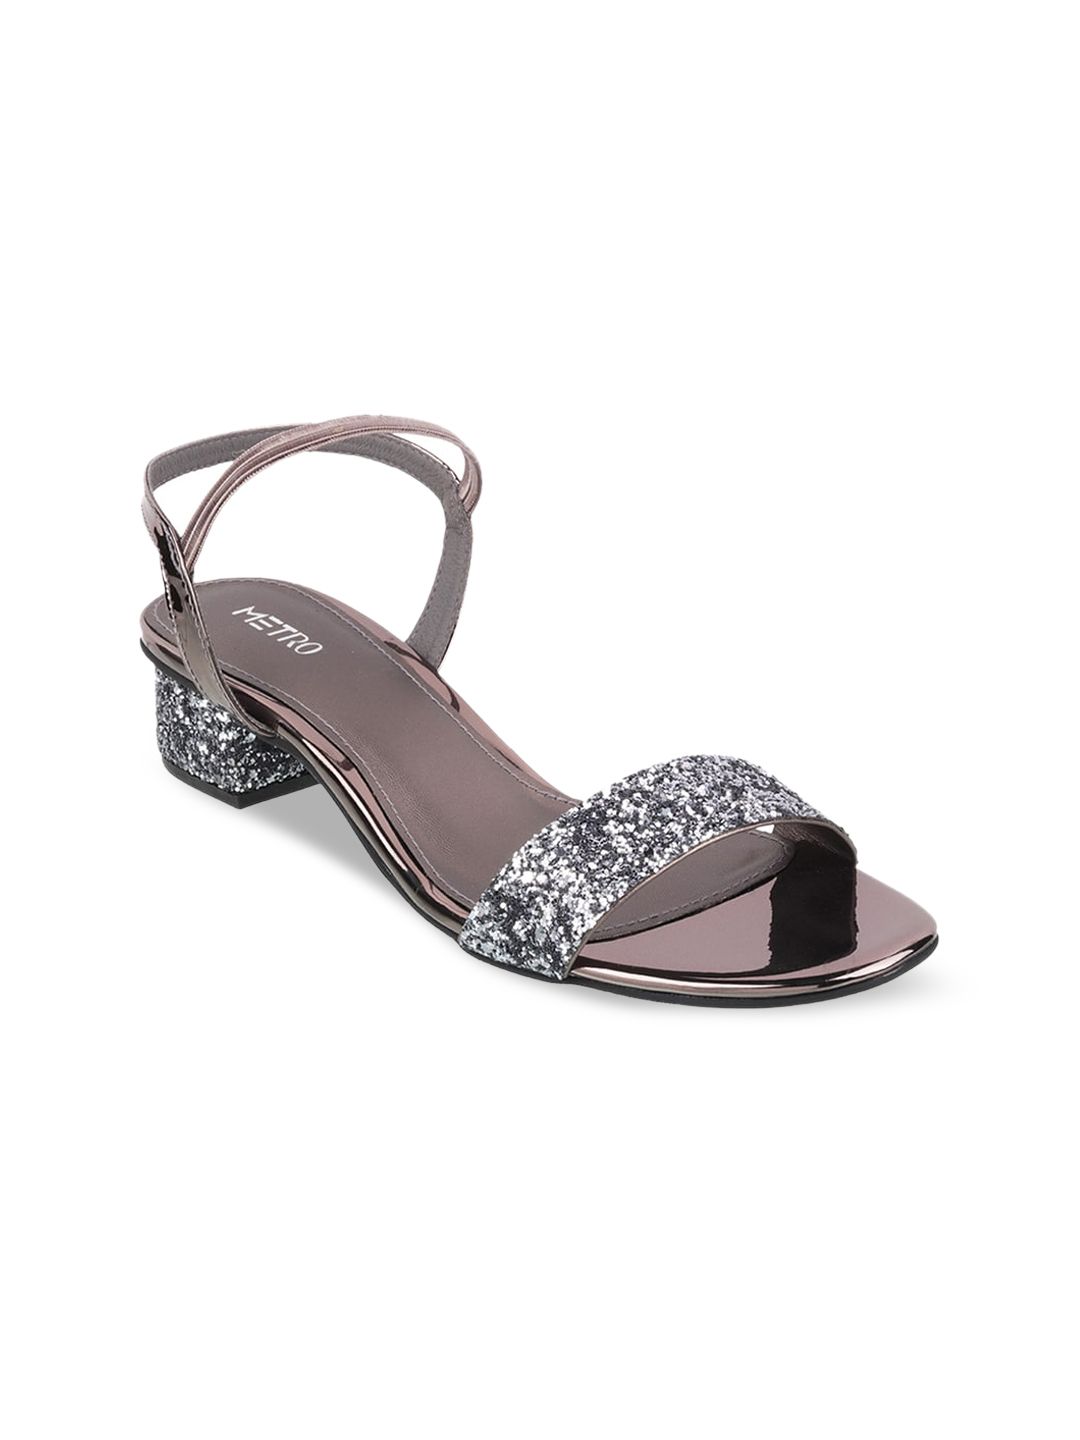 Metro Grey & Copper-Toned Embellished Block Peep Toes Price in India